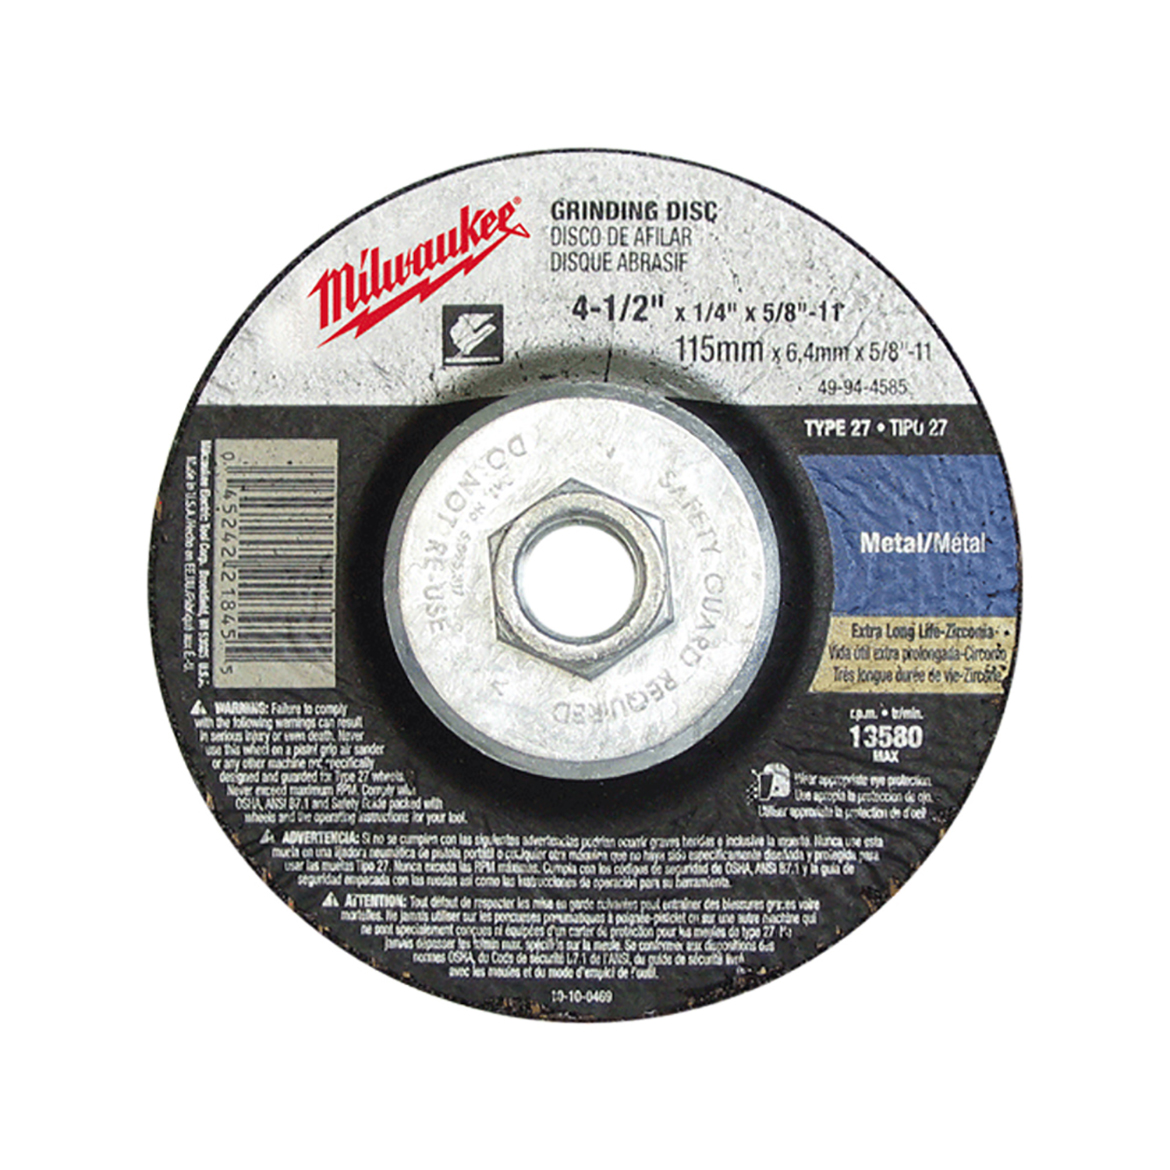 49-94-9735 045242219186 Milwaukee's comprehensive offering of grinding and cutting wheels consists of 45 unique products ranging in diameters from 4-1/2 in. to 14 in., with arbor configurations of 7/8 in., 20 mm, 1 in. and 5/8 in. to 11. Milwaukee's abrasive offering is manufactured using 3 types of abrasive grains, aluminum oxide, silicon Carbide and zirconia alumina, providing products for general purpose to specialized high performance applications.